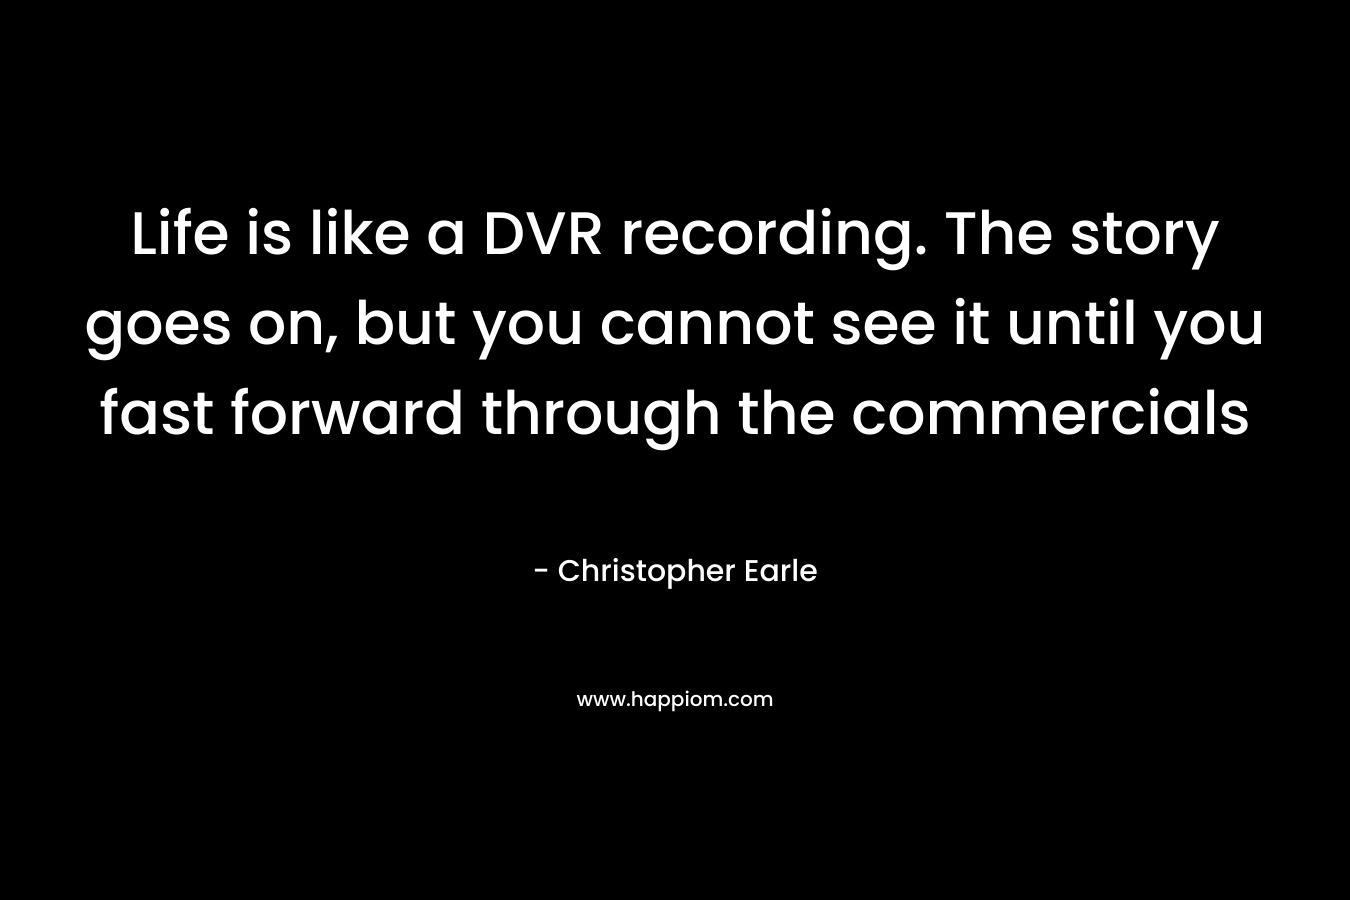 Life is like a DVR recording. The story goes on, but you cannot see it until you fast forward through the commercials – Christopher Earle